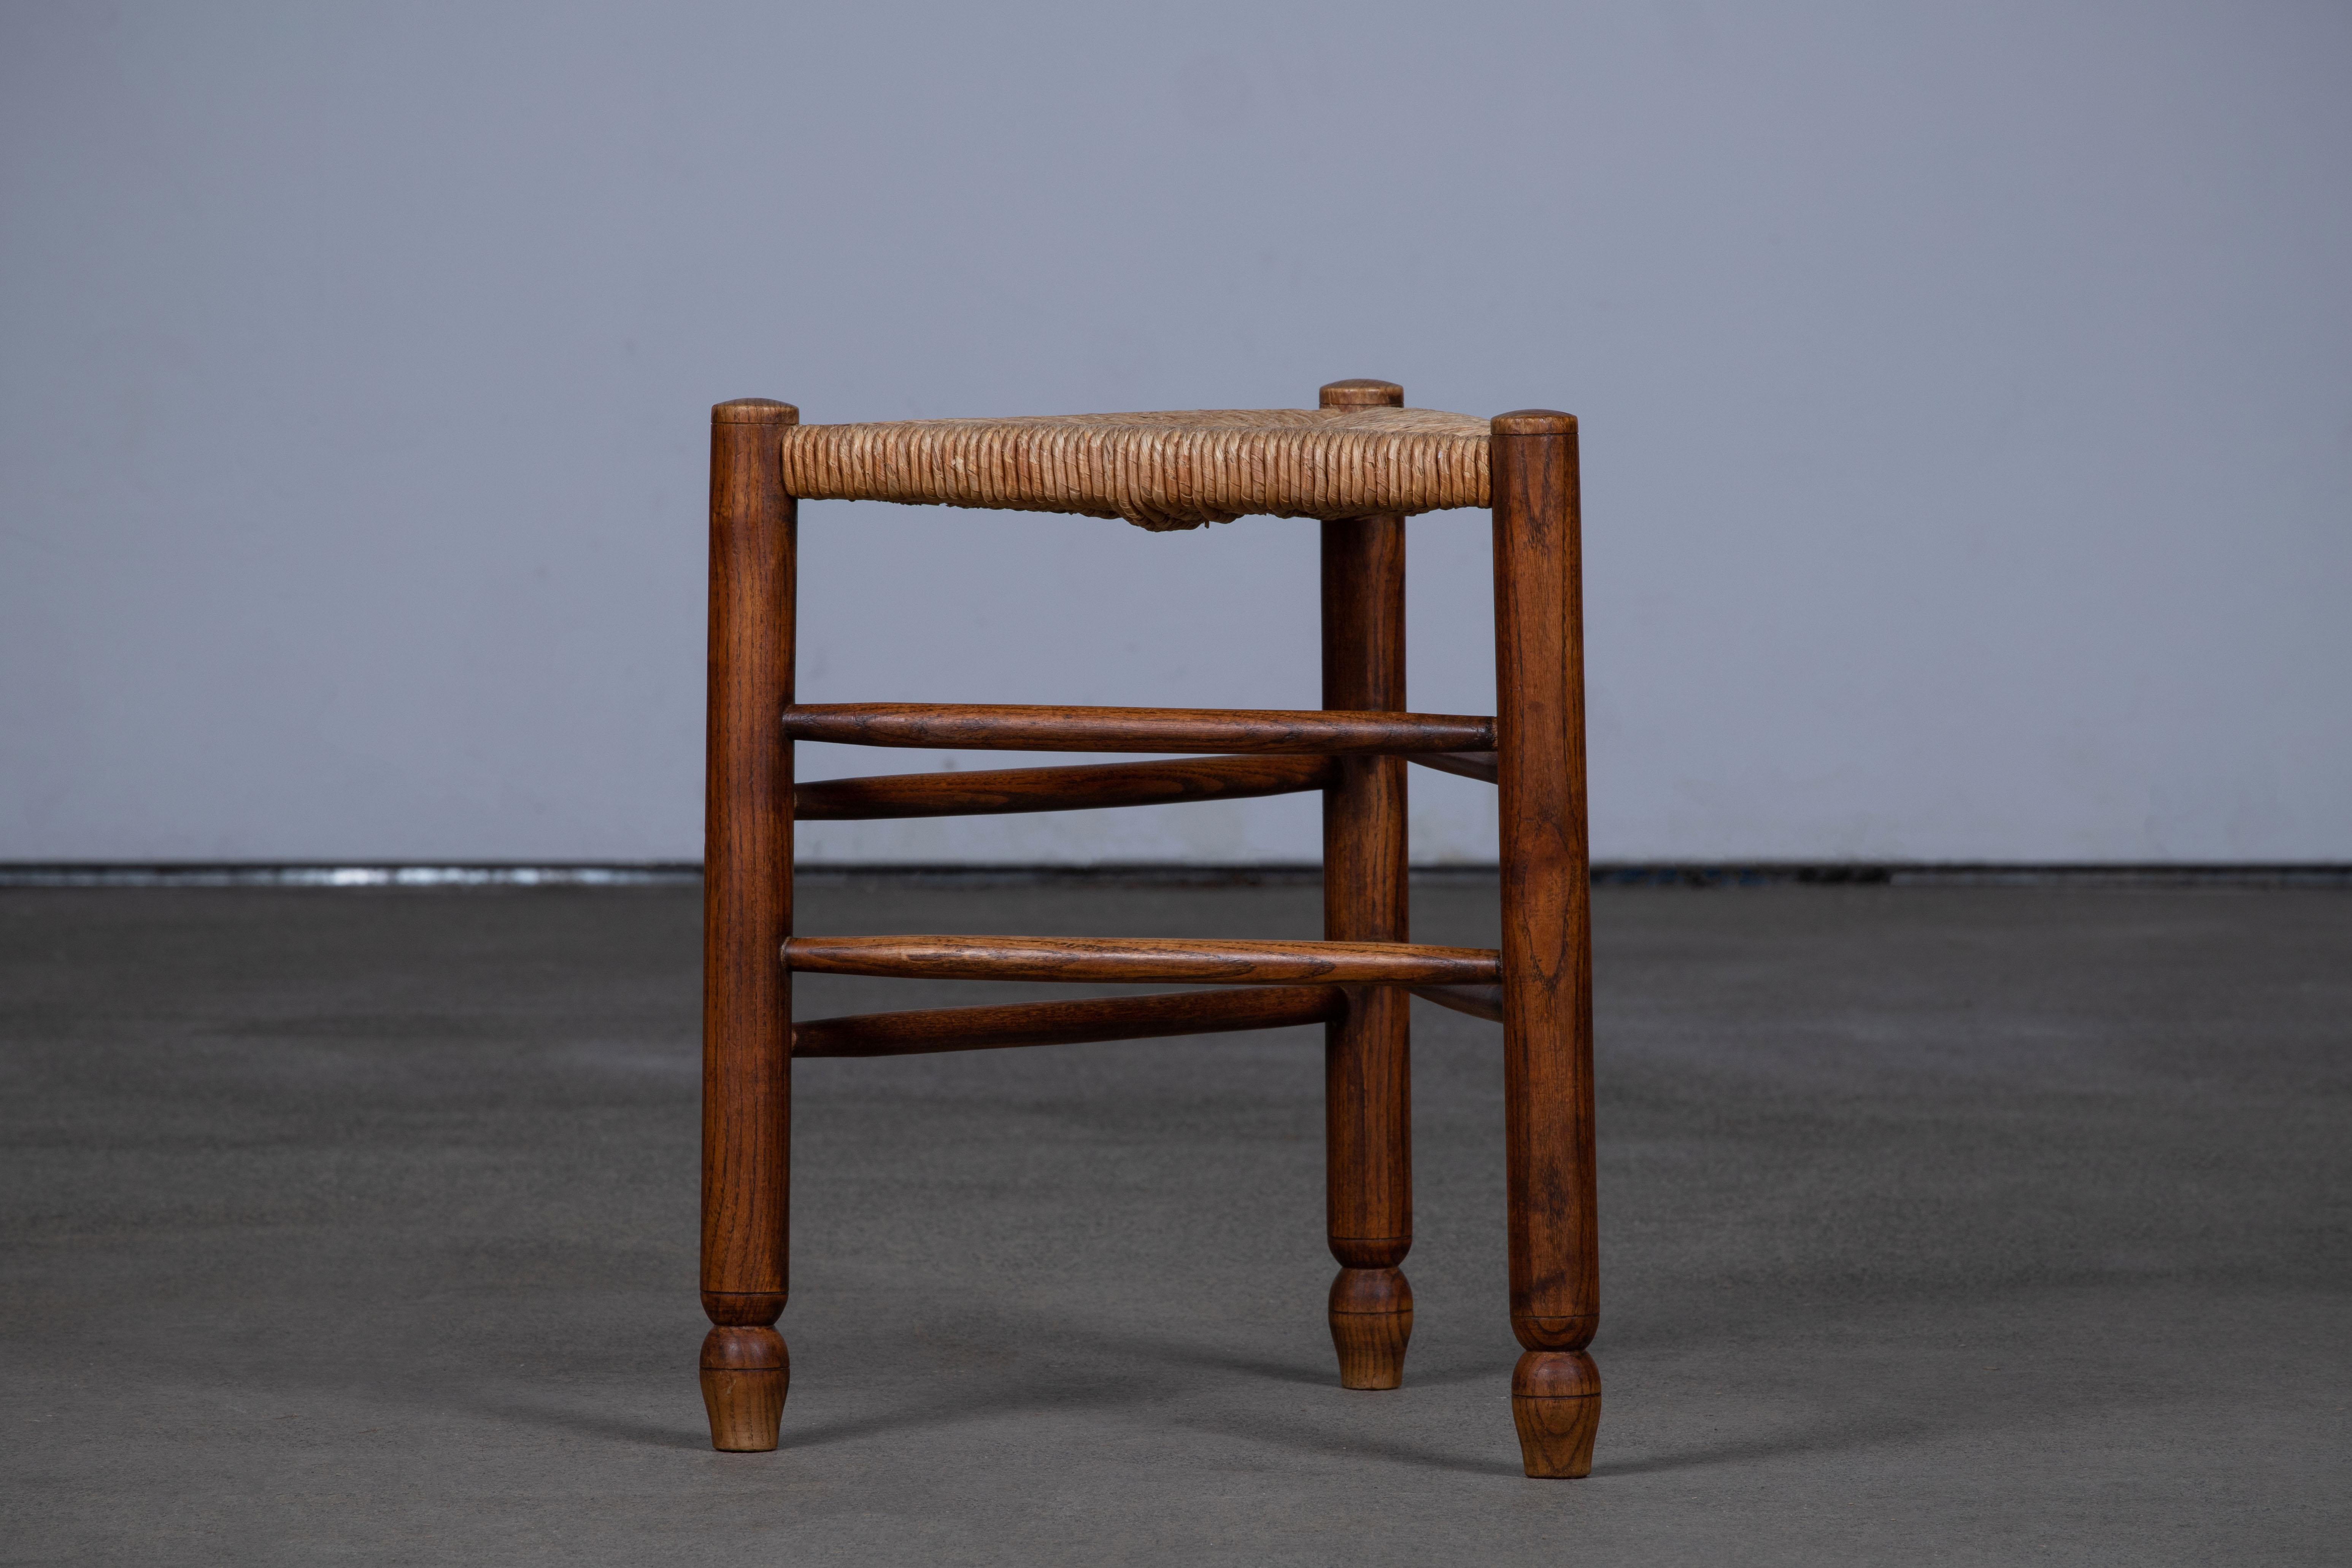 20th Century French Brutalist Handcarved Tripod Stool, in Style of Charlotte Perriand